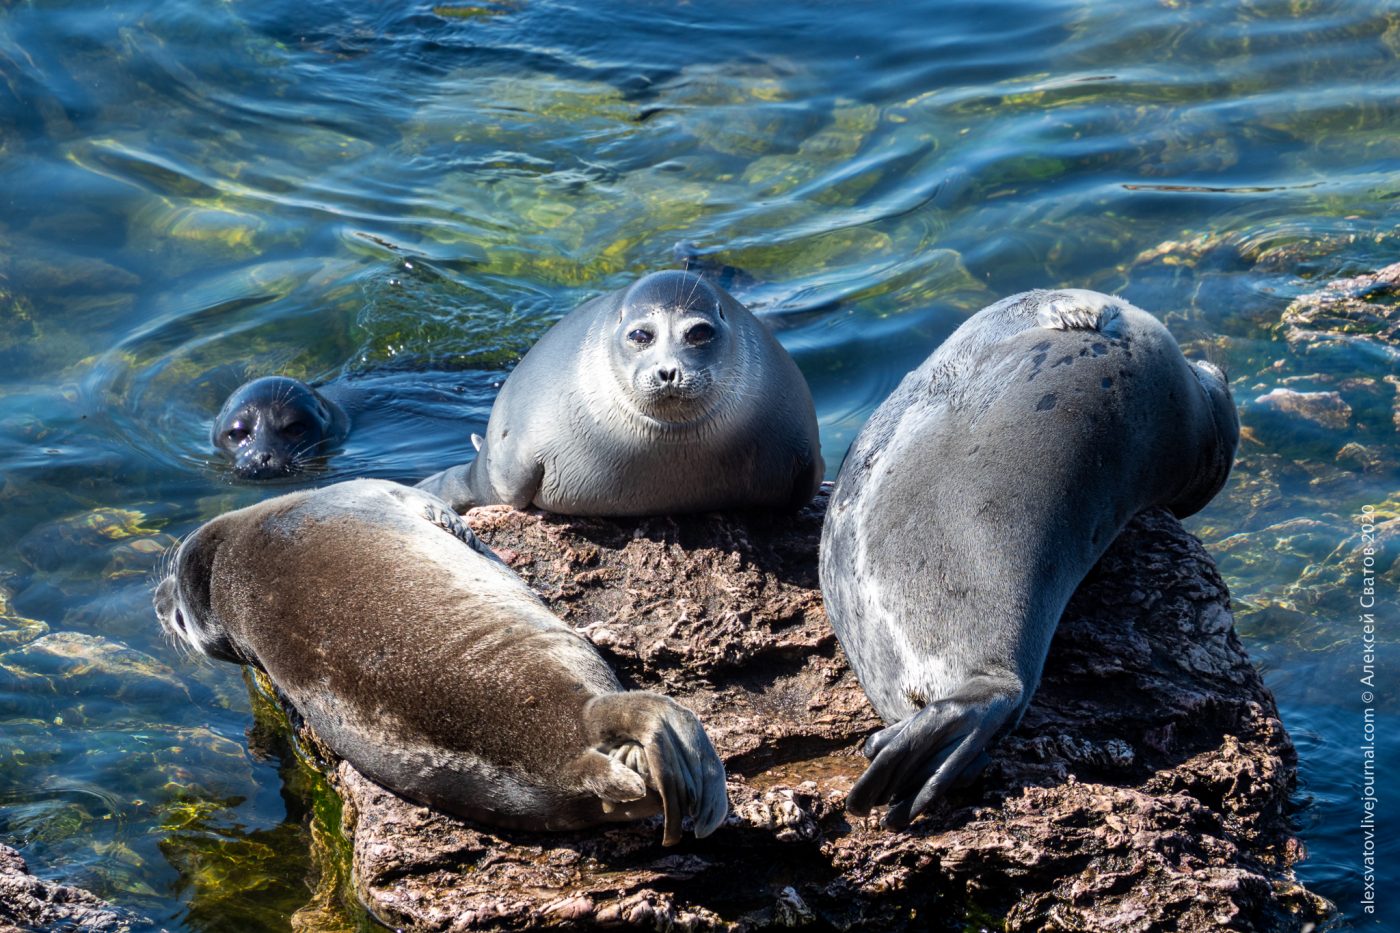 Russian scientists for the first time assessed the genetic diversity of the Baikal seal